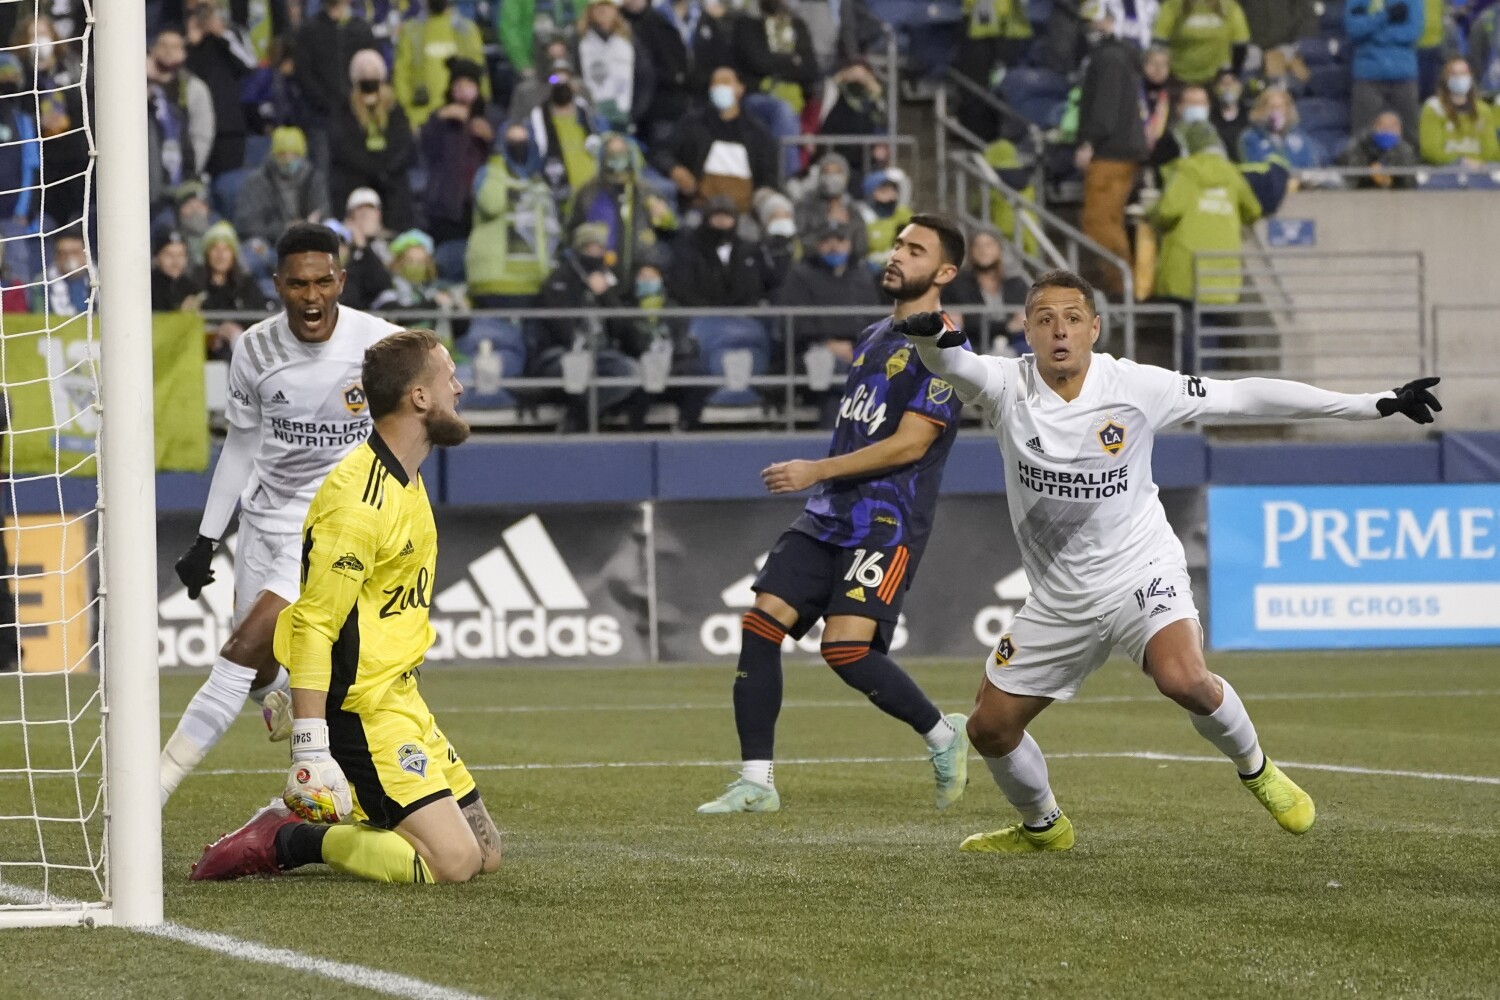 Galaxy's playoff hopes tenuous after tie with Sounders